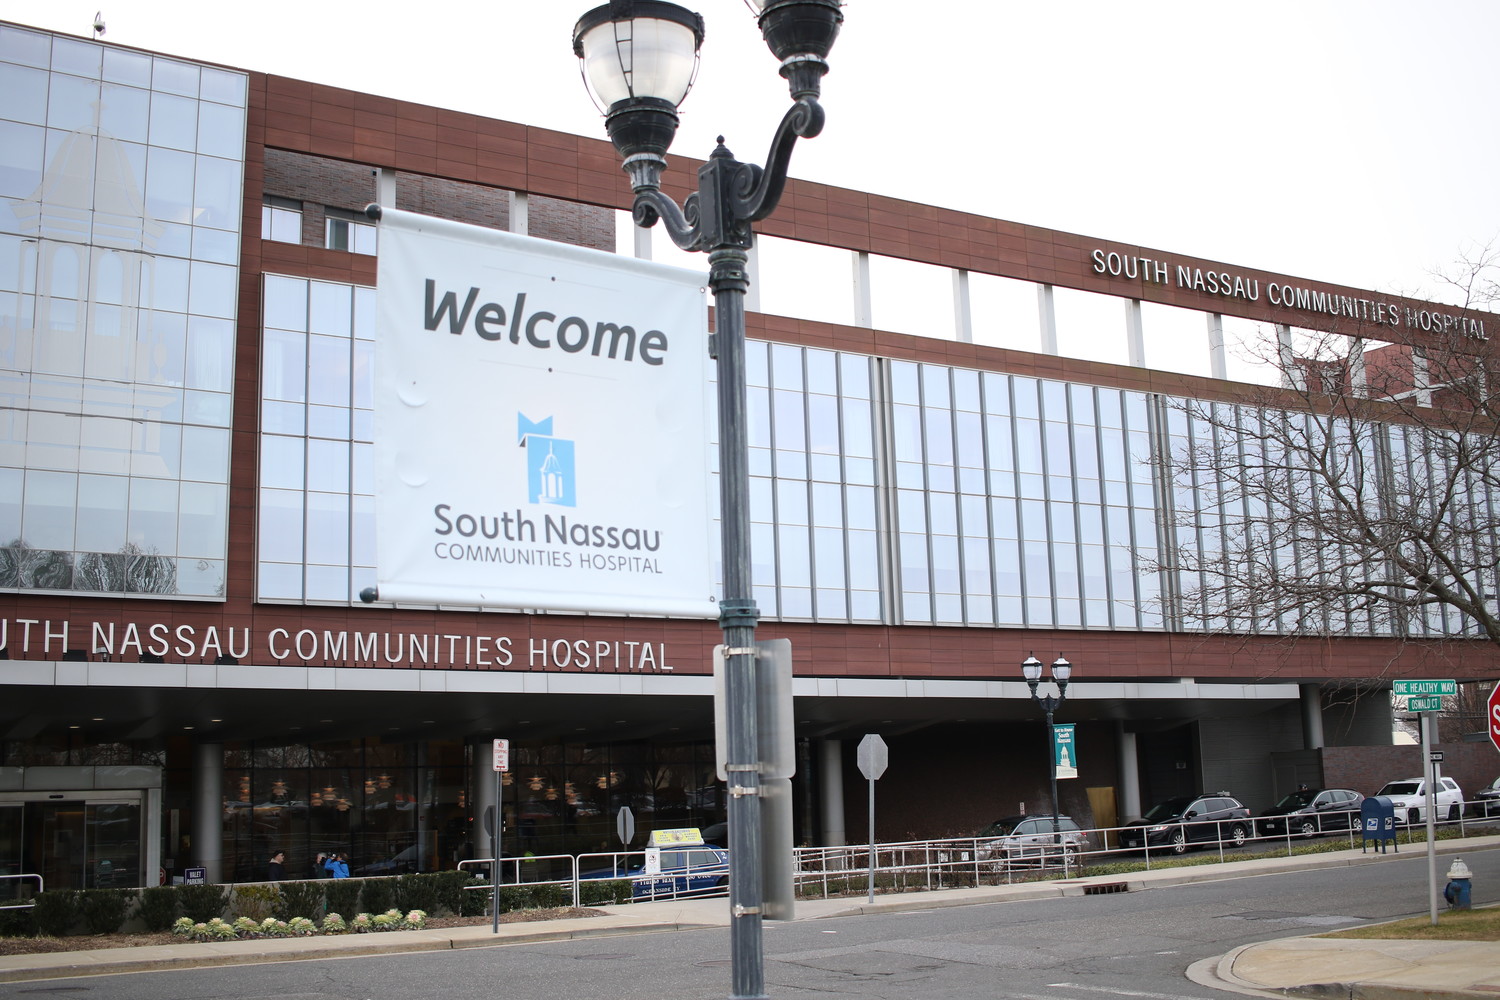 South Nassau announced on Jan. 24 that its Board of Directors had unanimously approved a partnership with the Mount Sinai Health System — a $7 billion network with seven hospitals in the New York metropolitan area.